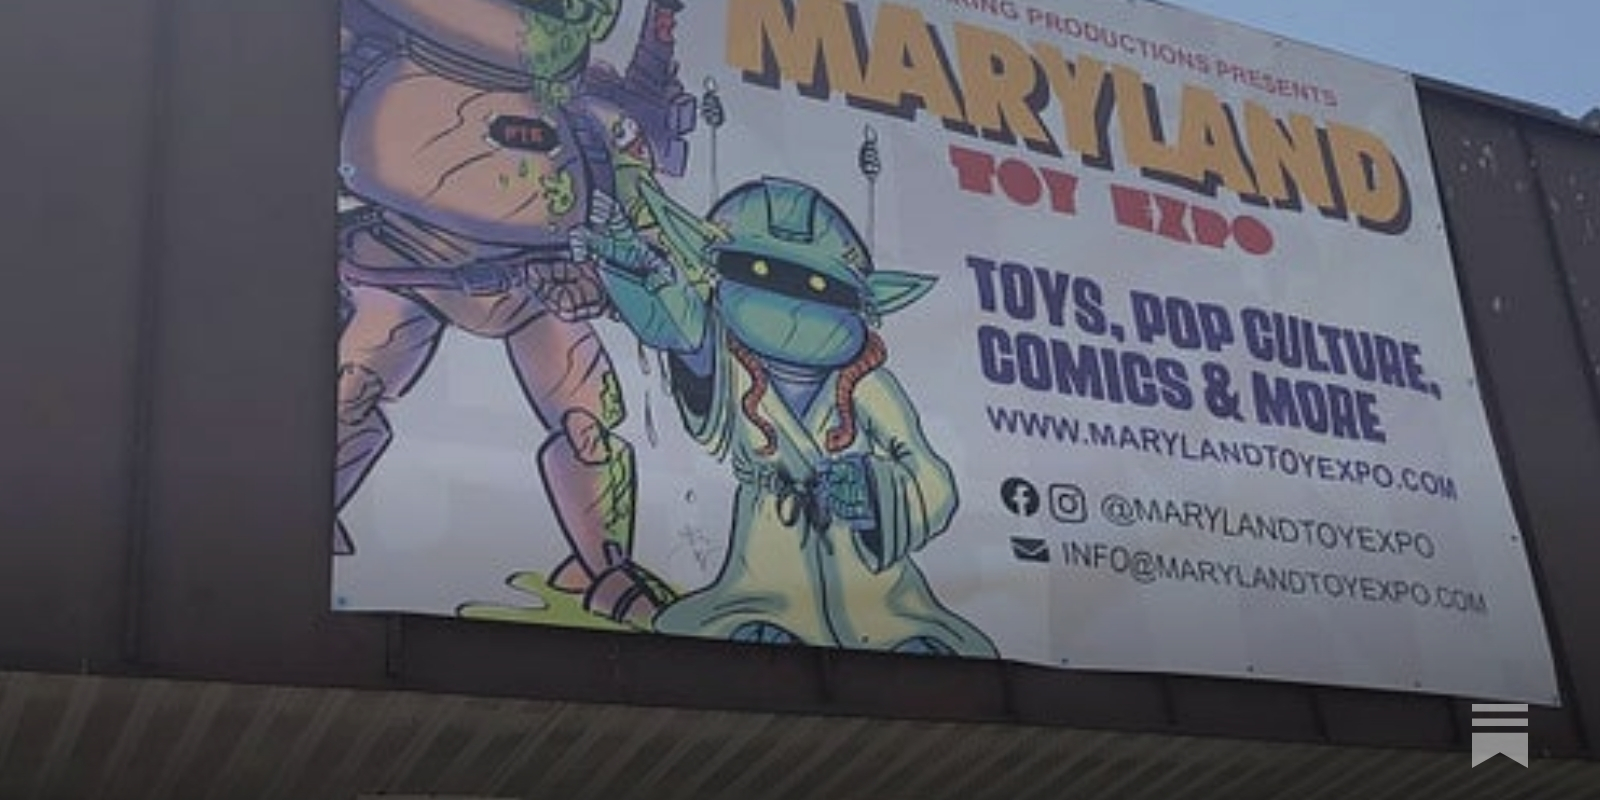 Review: Maryland Toy Expo - by Jeff Quinton